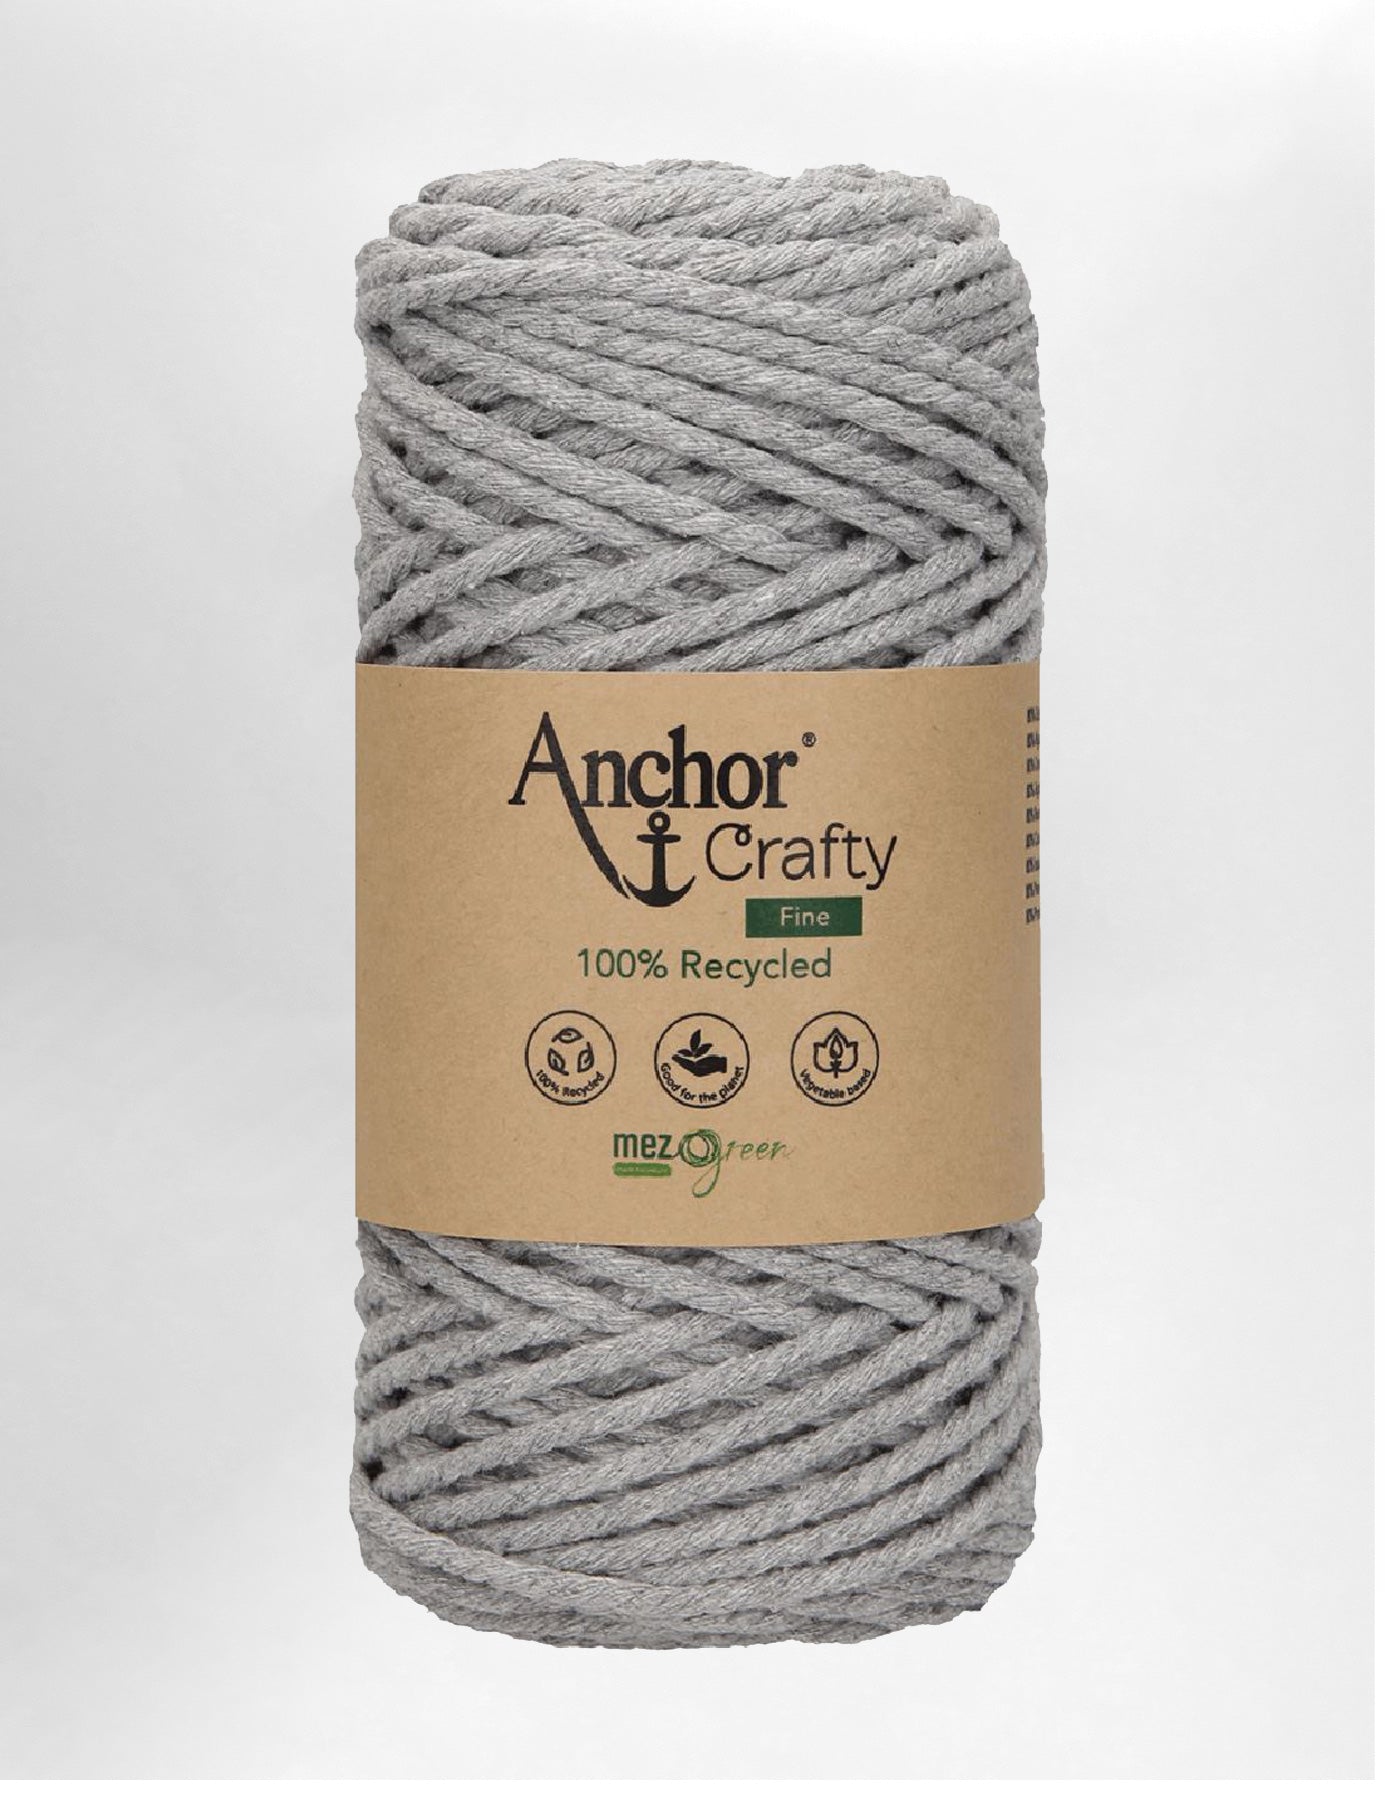 Anchor Crafty 3mm Ash 3ply recycled cotton macrame cord (65m)